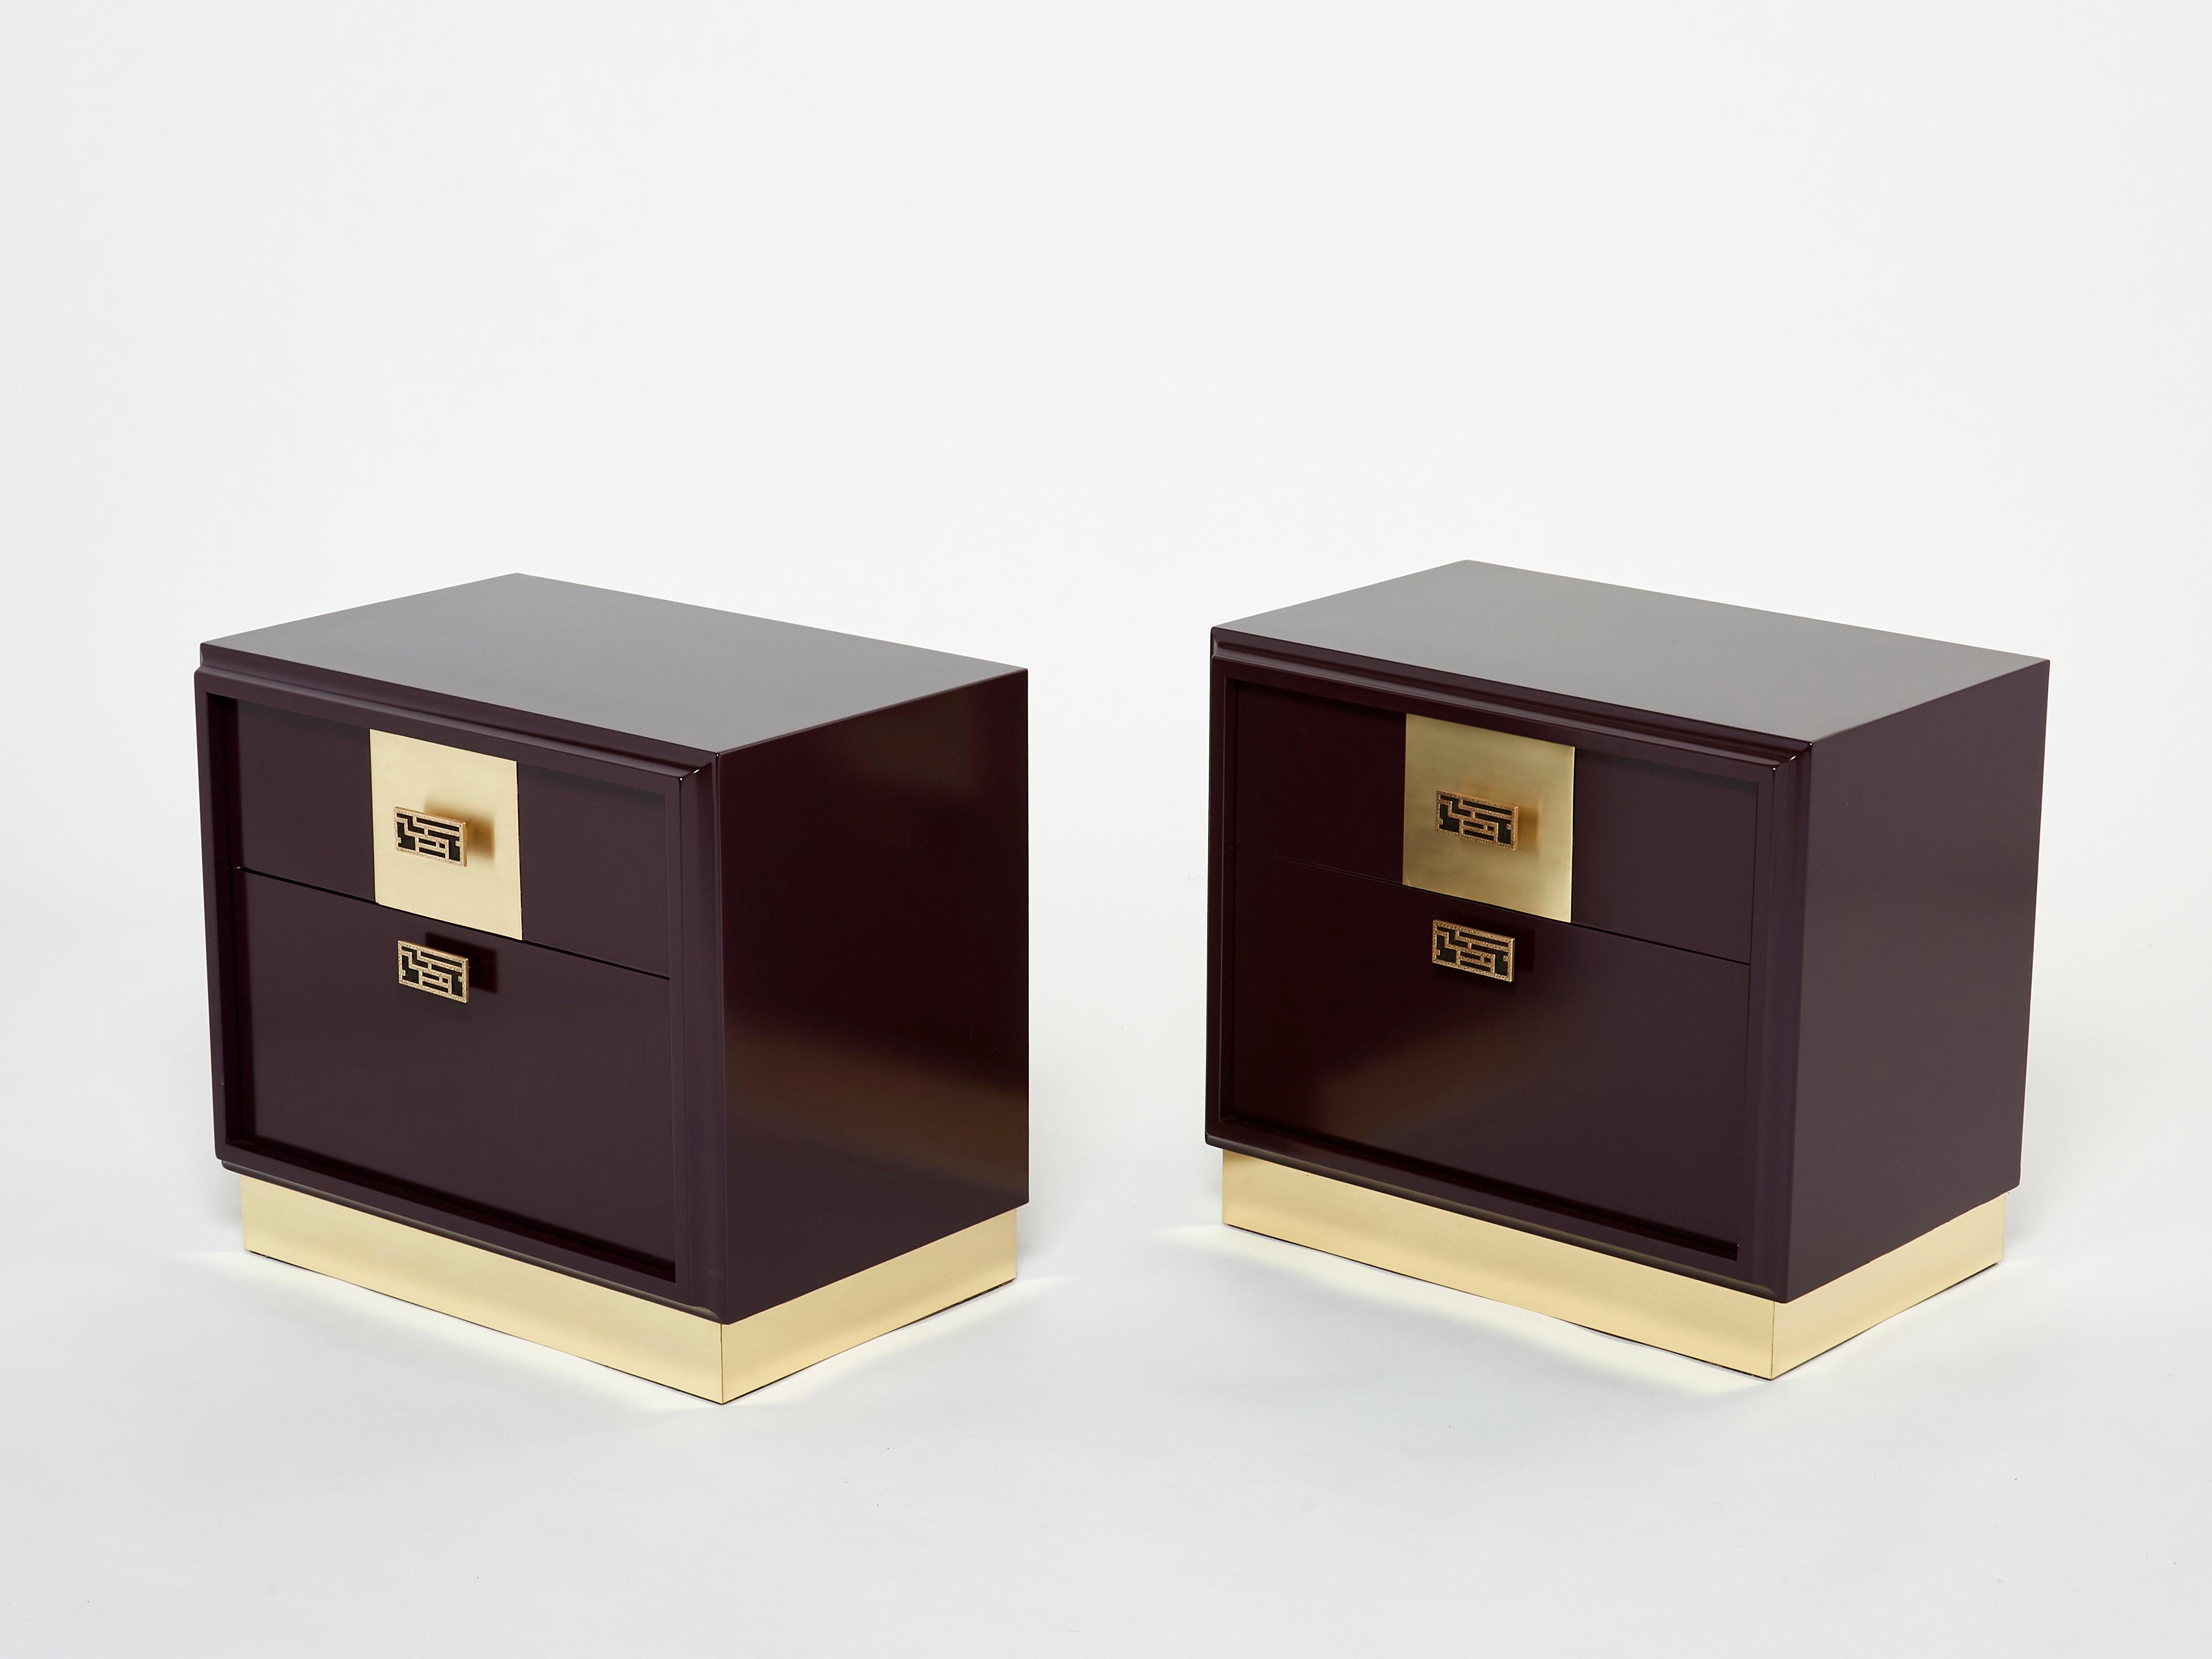 Pair of Italian Luciano Frigerio Plum Lacquered Brass Nightstands Tables, 1970s For Sale 2